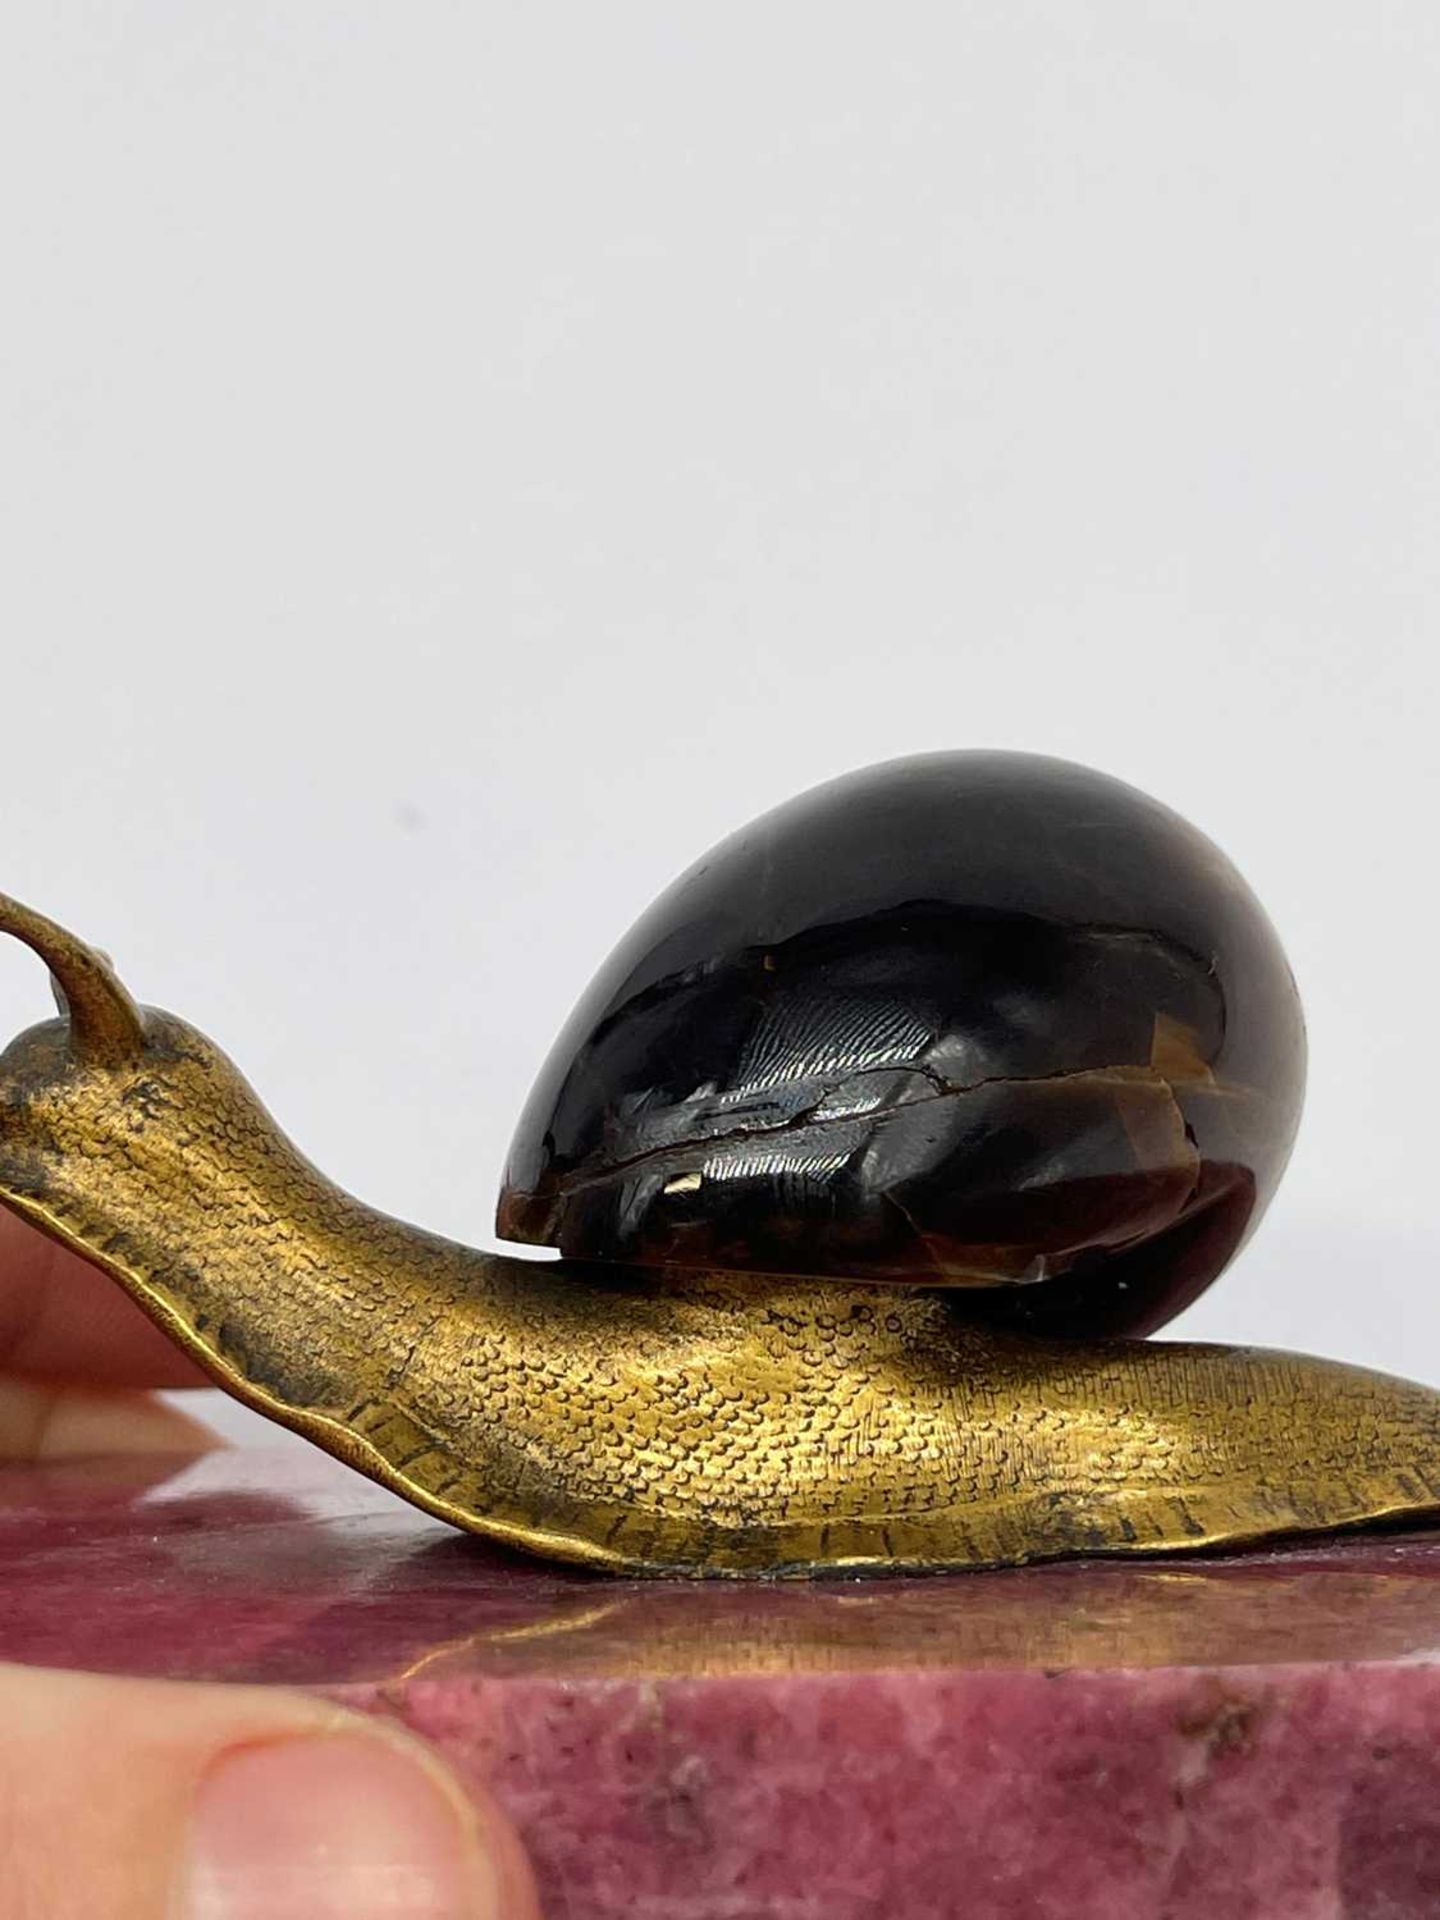 A tiger's eye and ormolu snail, - Image 17 of 25